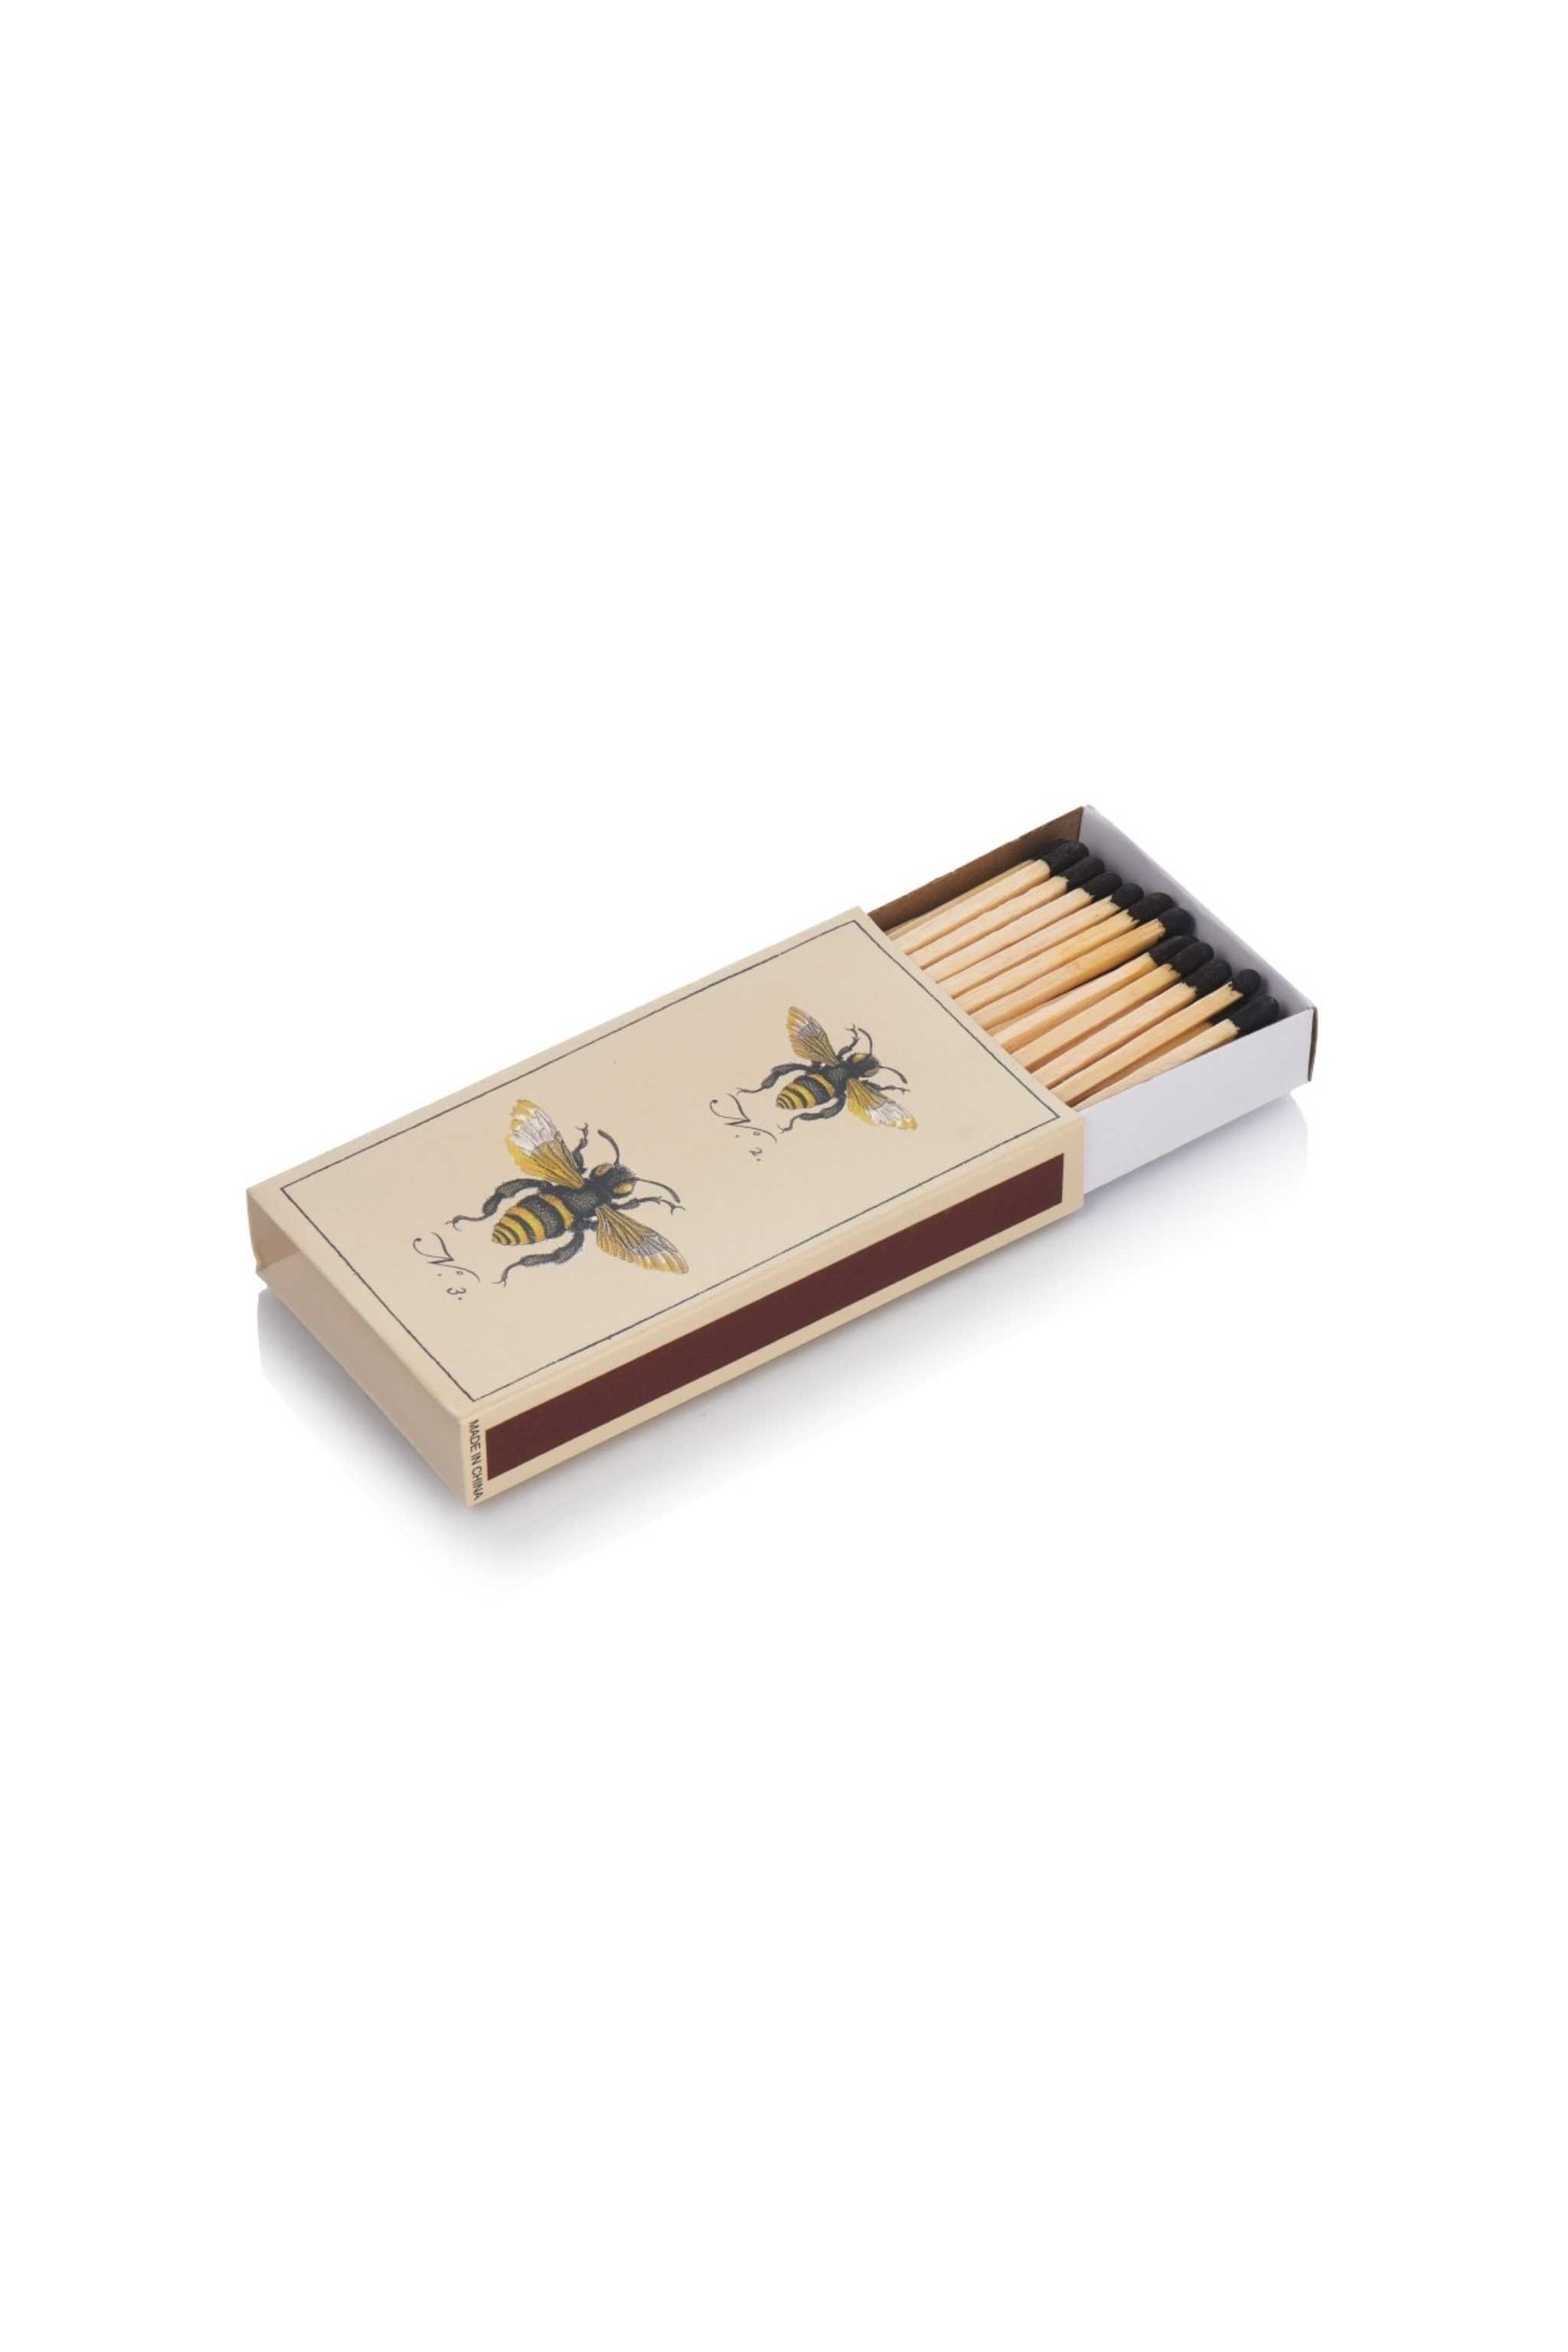 Cream wooden matches in a Cream matchbox with a black and yellow honeybee illustration with match box open. 